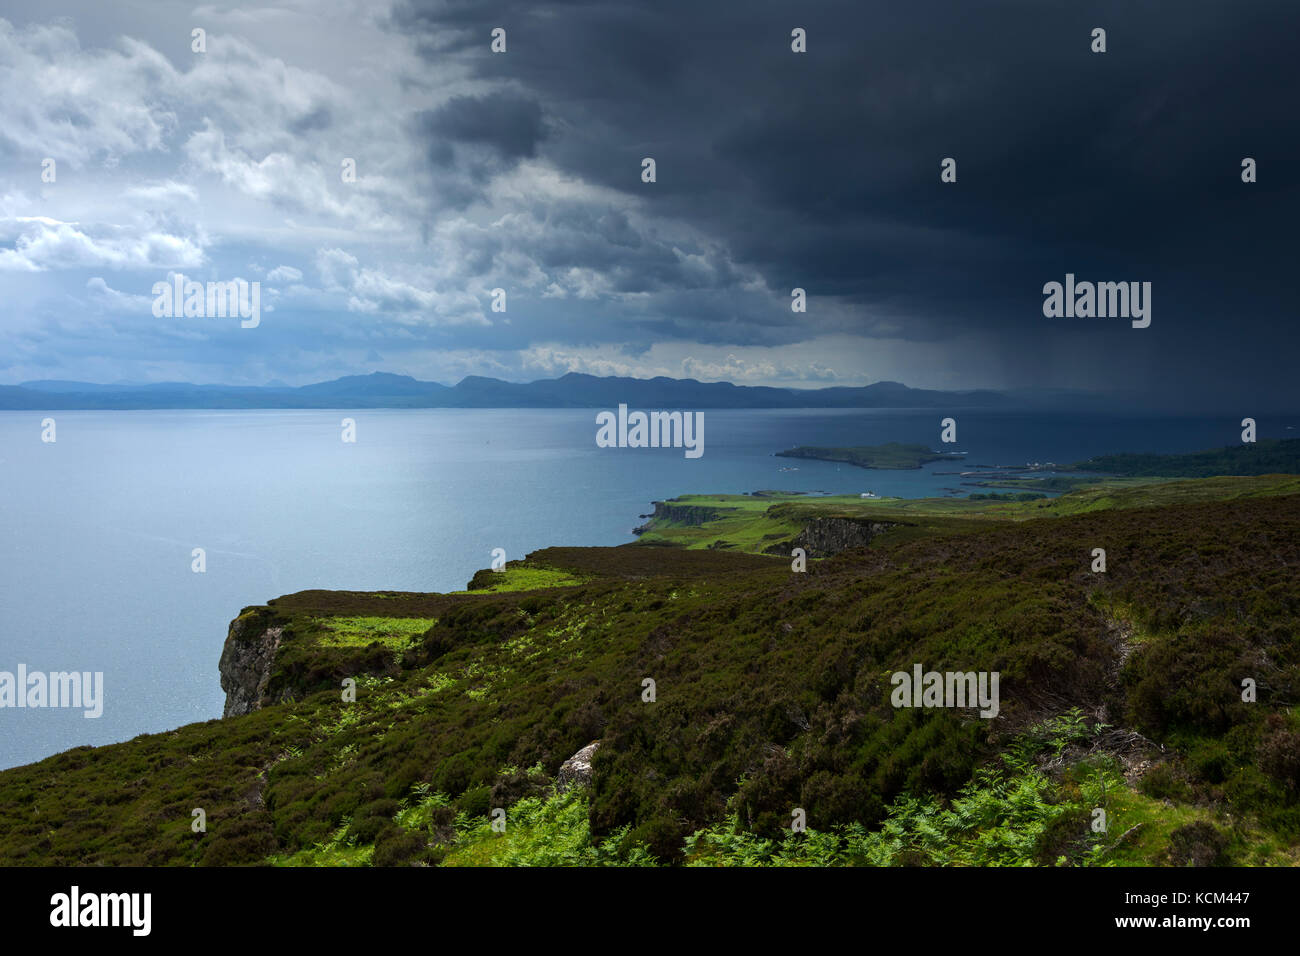 The Scottish mainland from the eastern edge of the Beinn Bhuidhe plateau with a storm approaching, on the Isle of Eigg, Scotland, UK Stock Photo